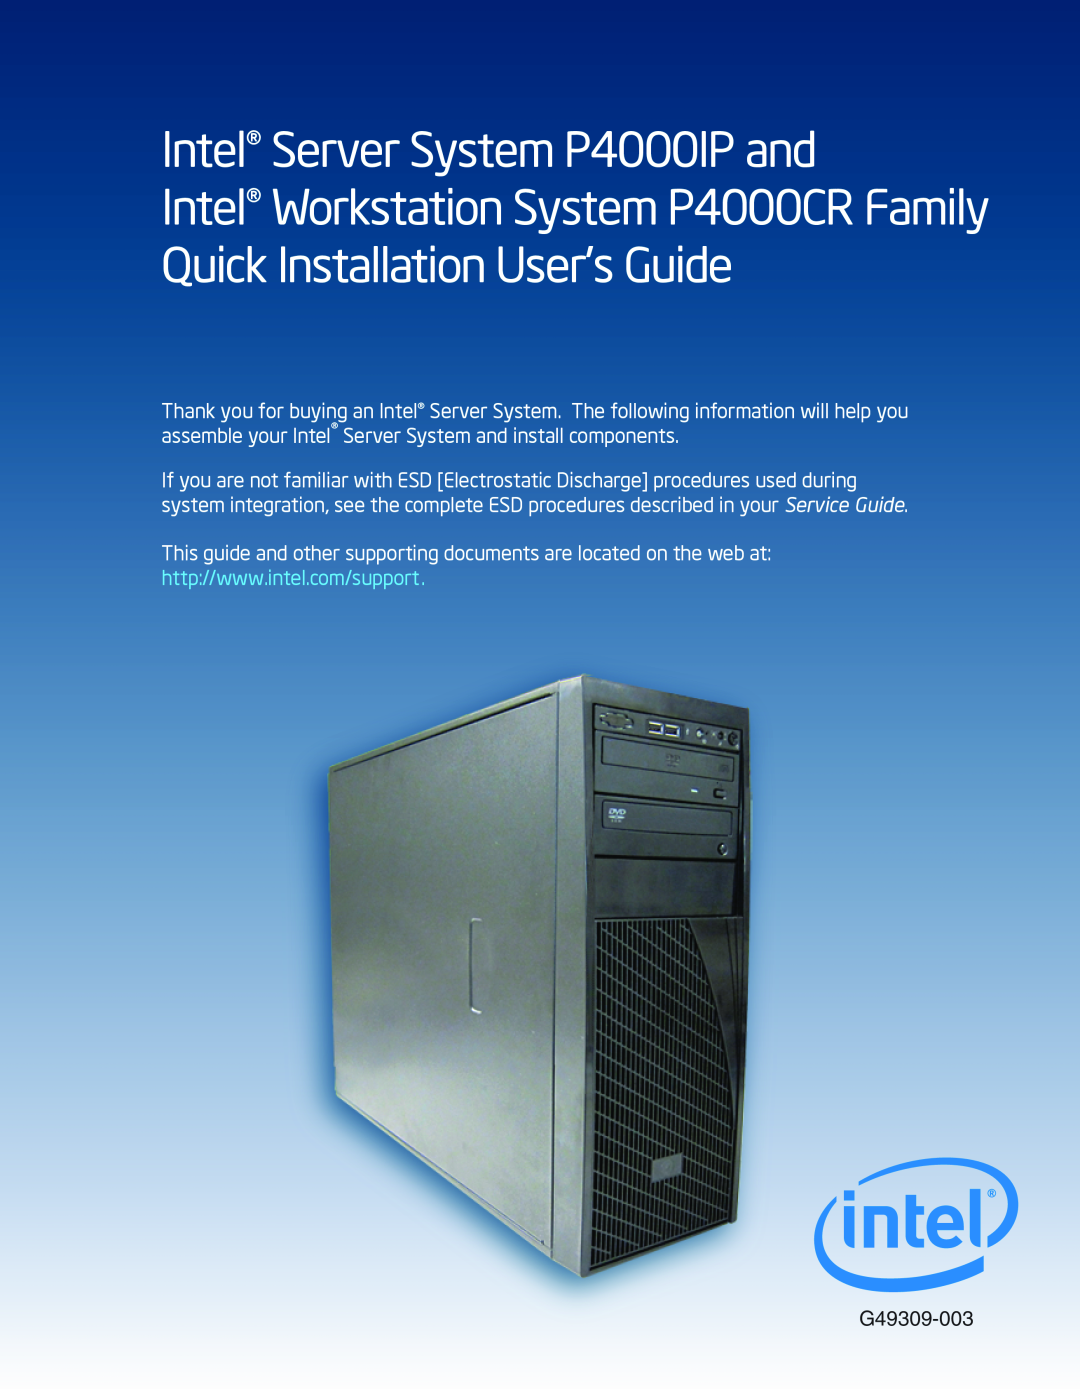 Intel P4304CR2LFKN manual Intel Server System P4000IP and, Quick Installation Users Guide 